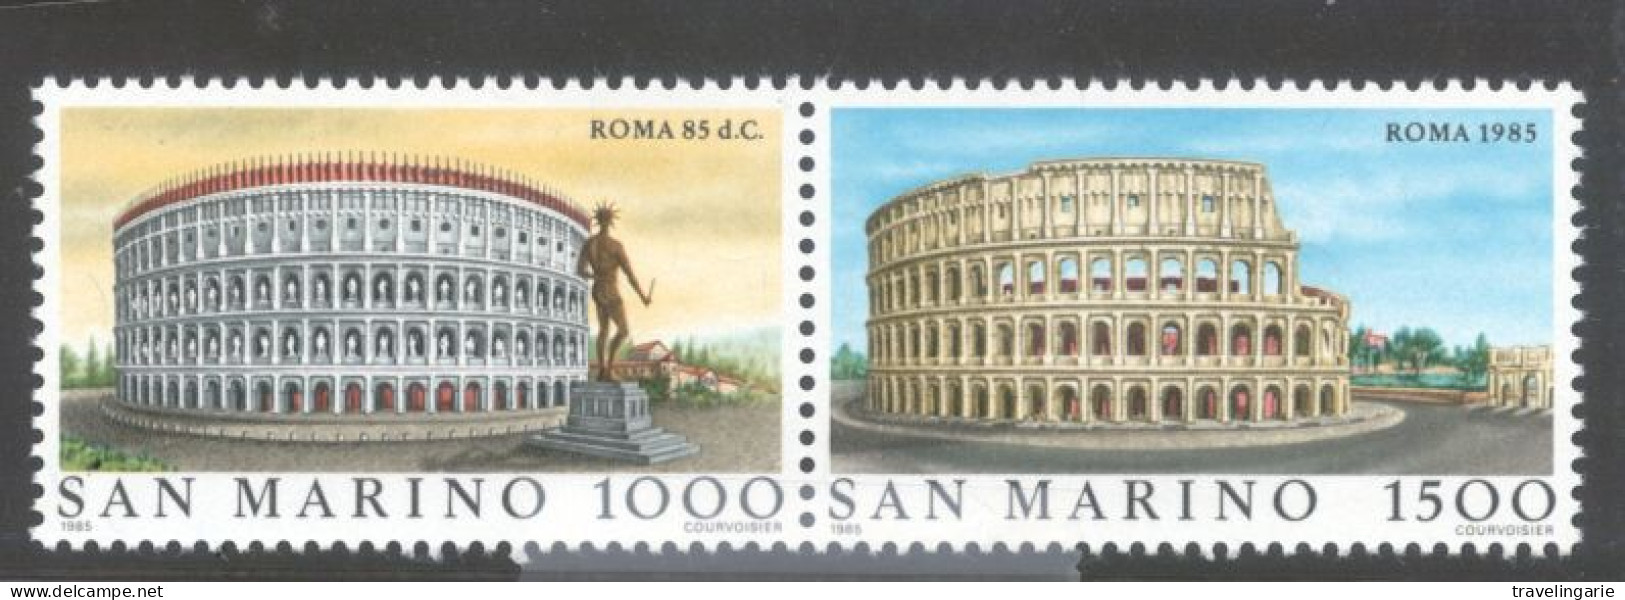 San Marino 1985 Famous Cities Roma MNH ** Se-tenant Pair - Used Stamps